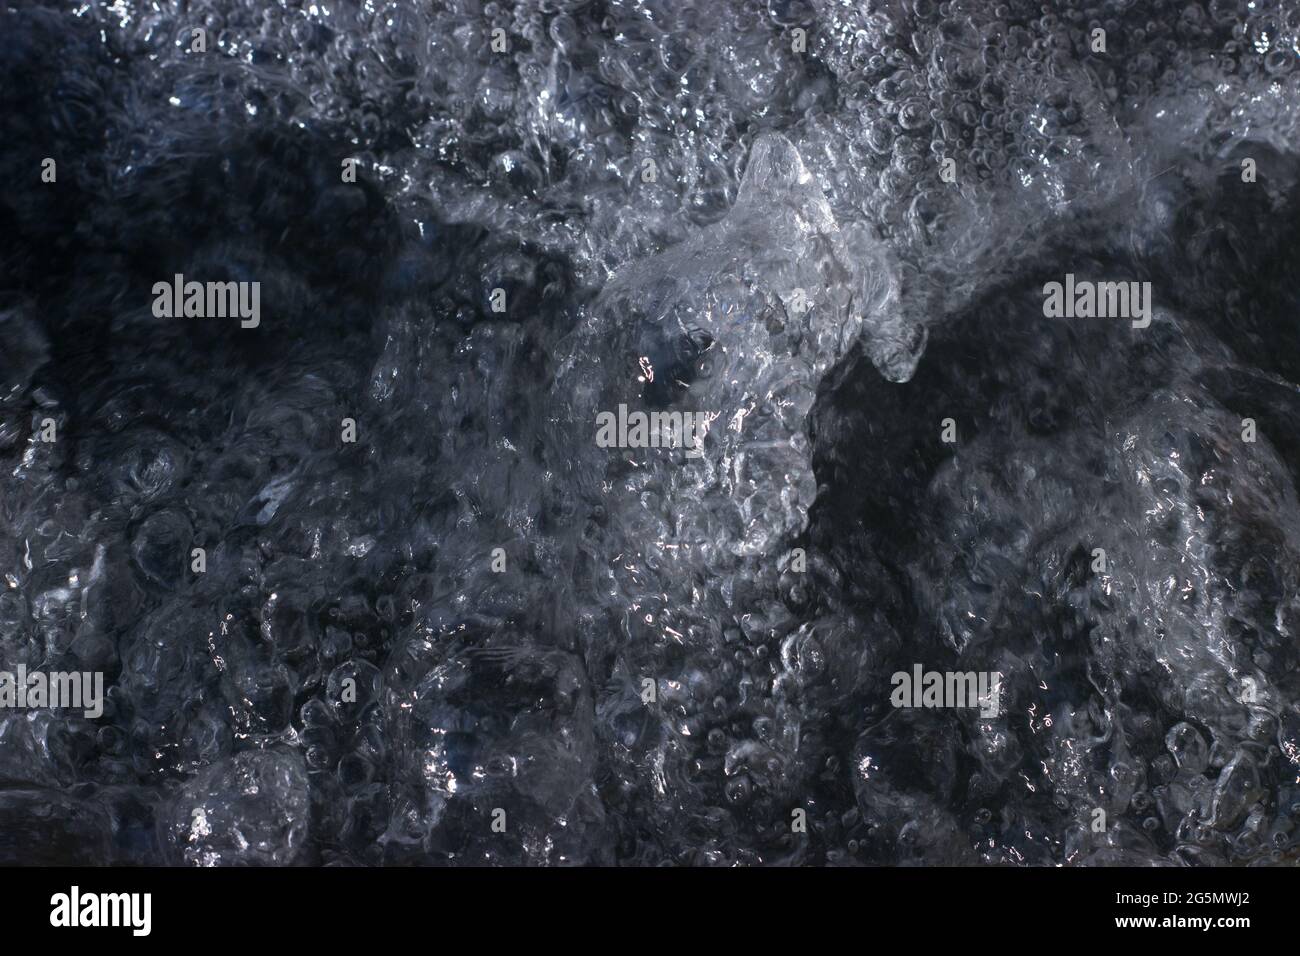 Concept Background of bubbling water in a hot tub Stock Photo